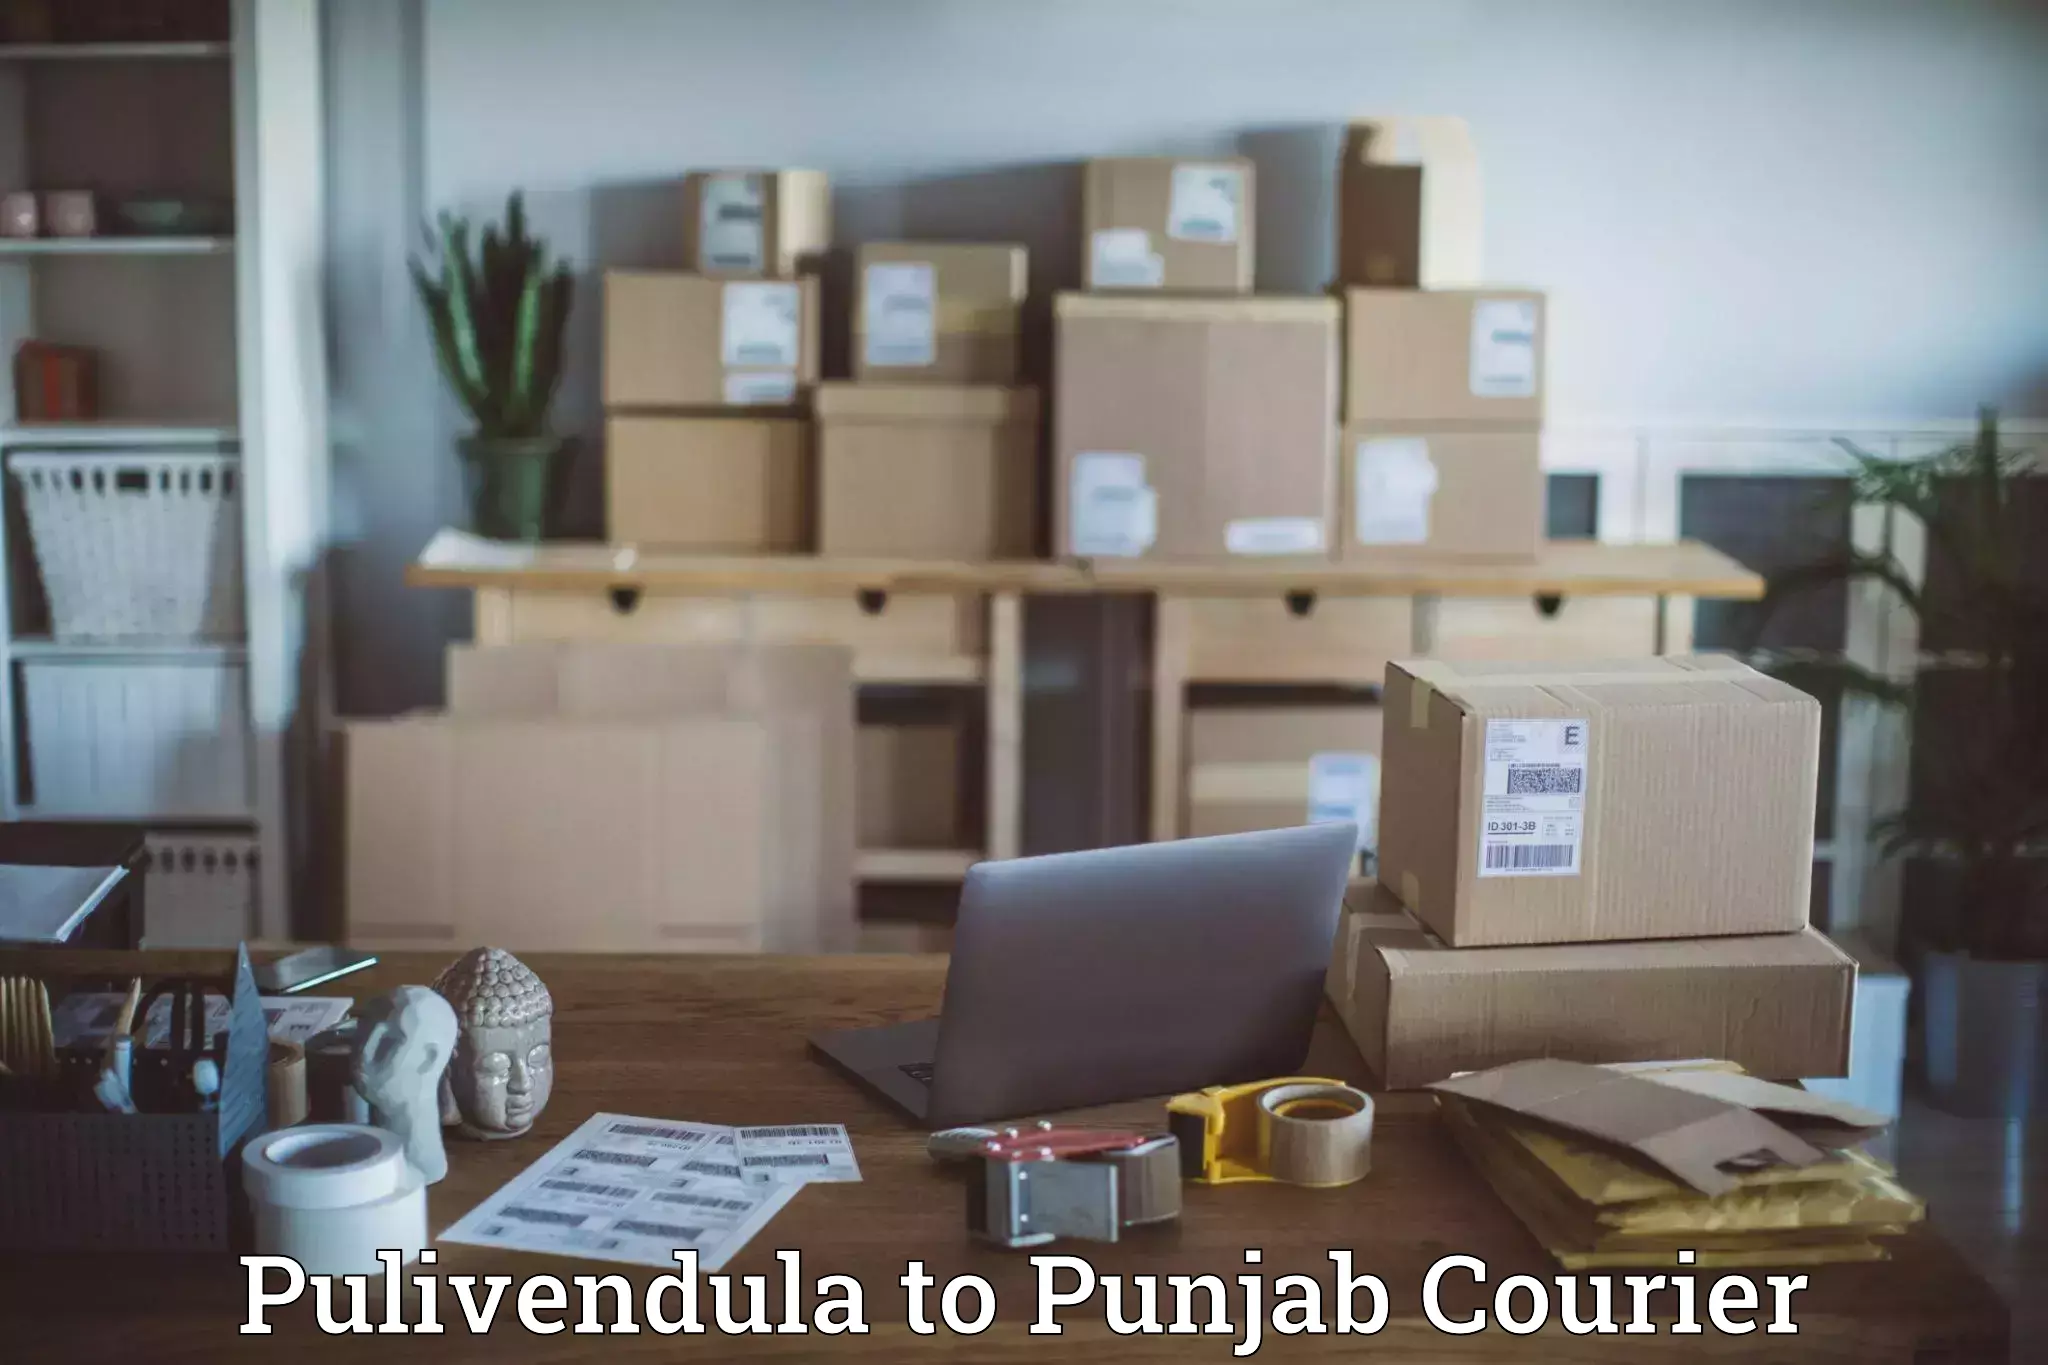 Global parcel delivery Pulivendula to Faridkot